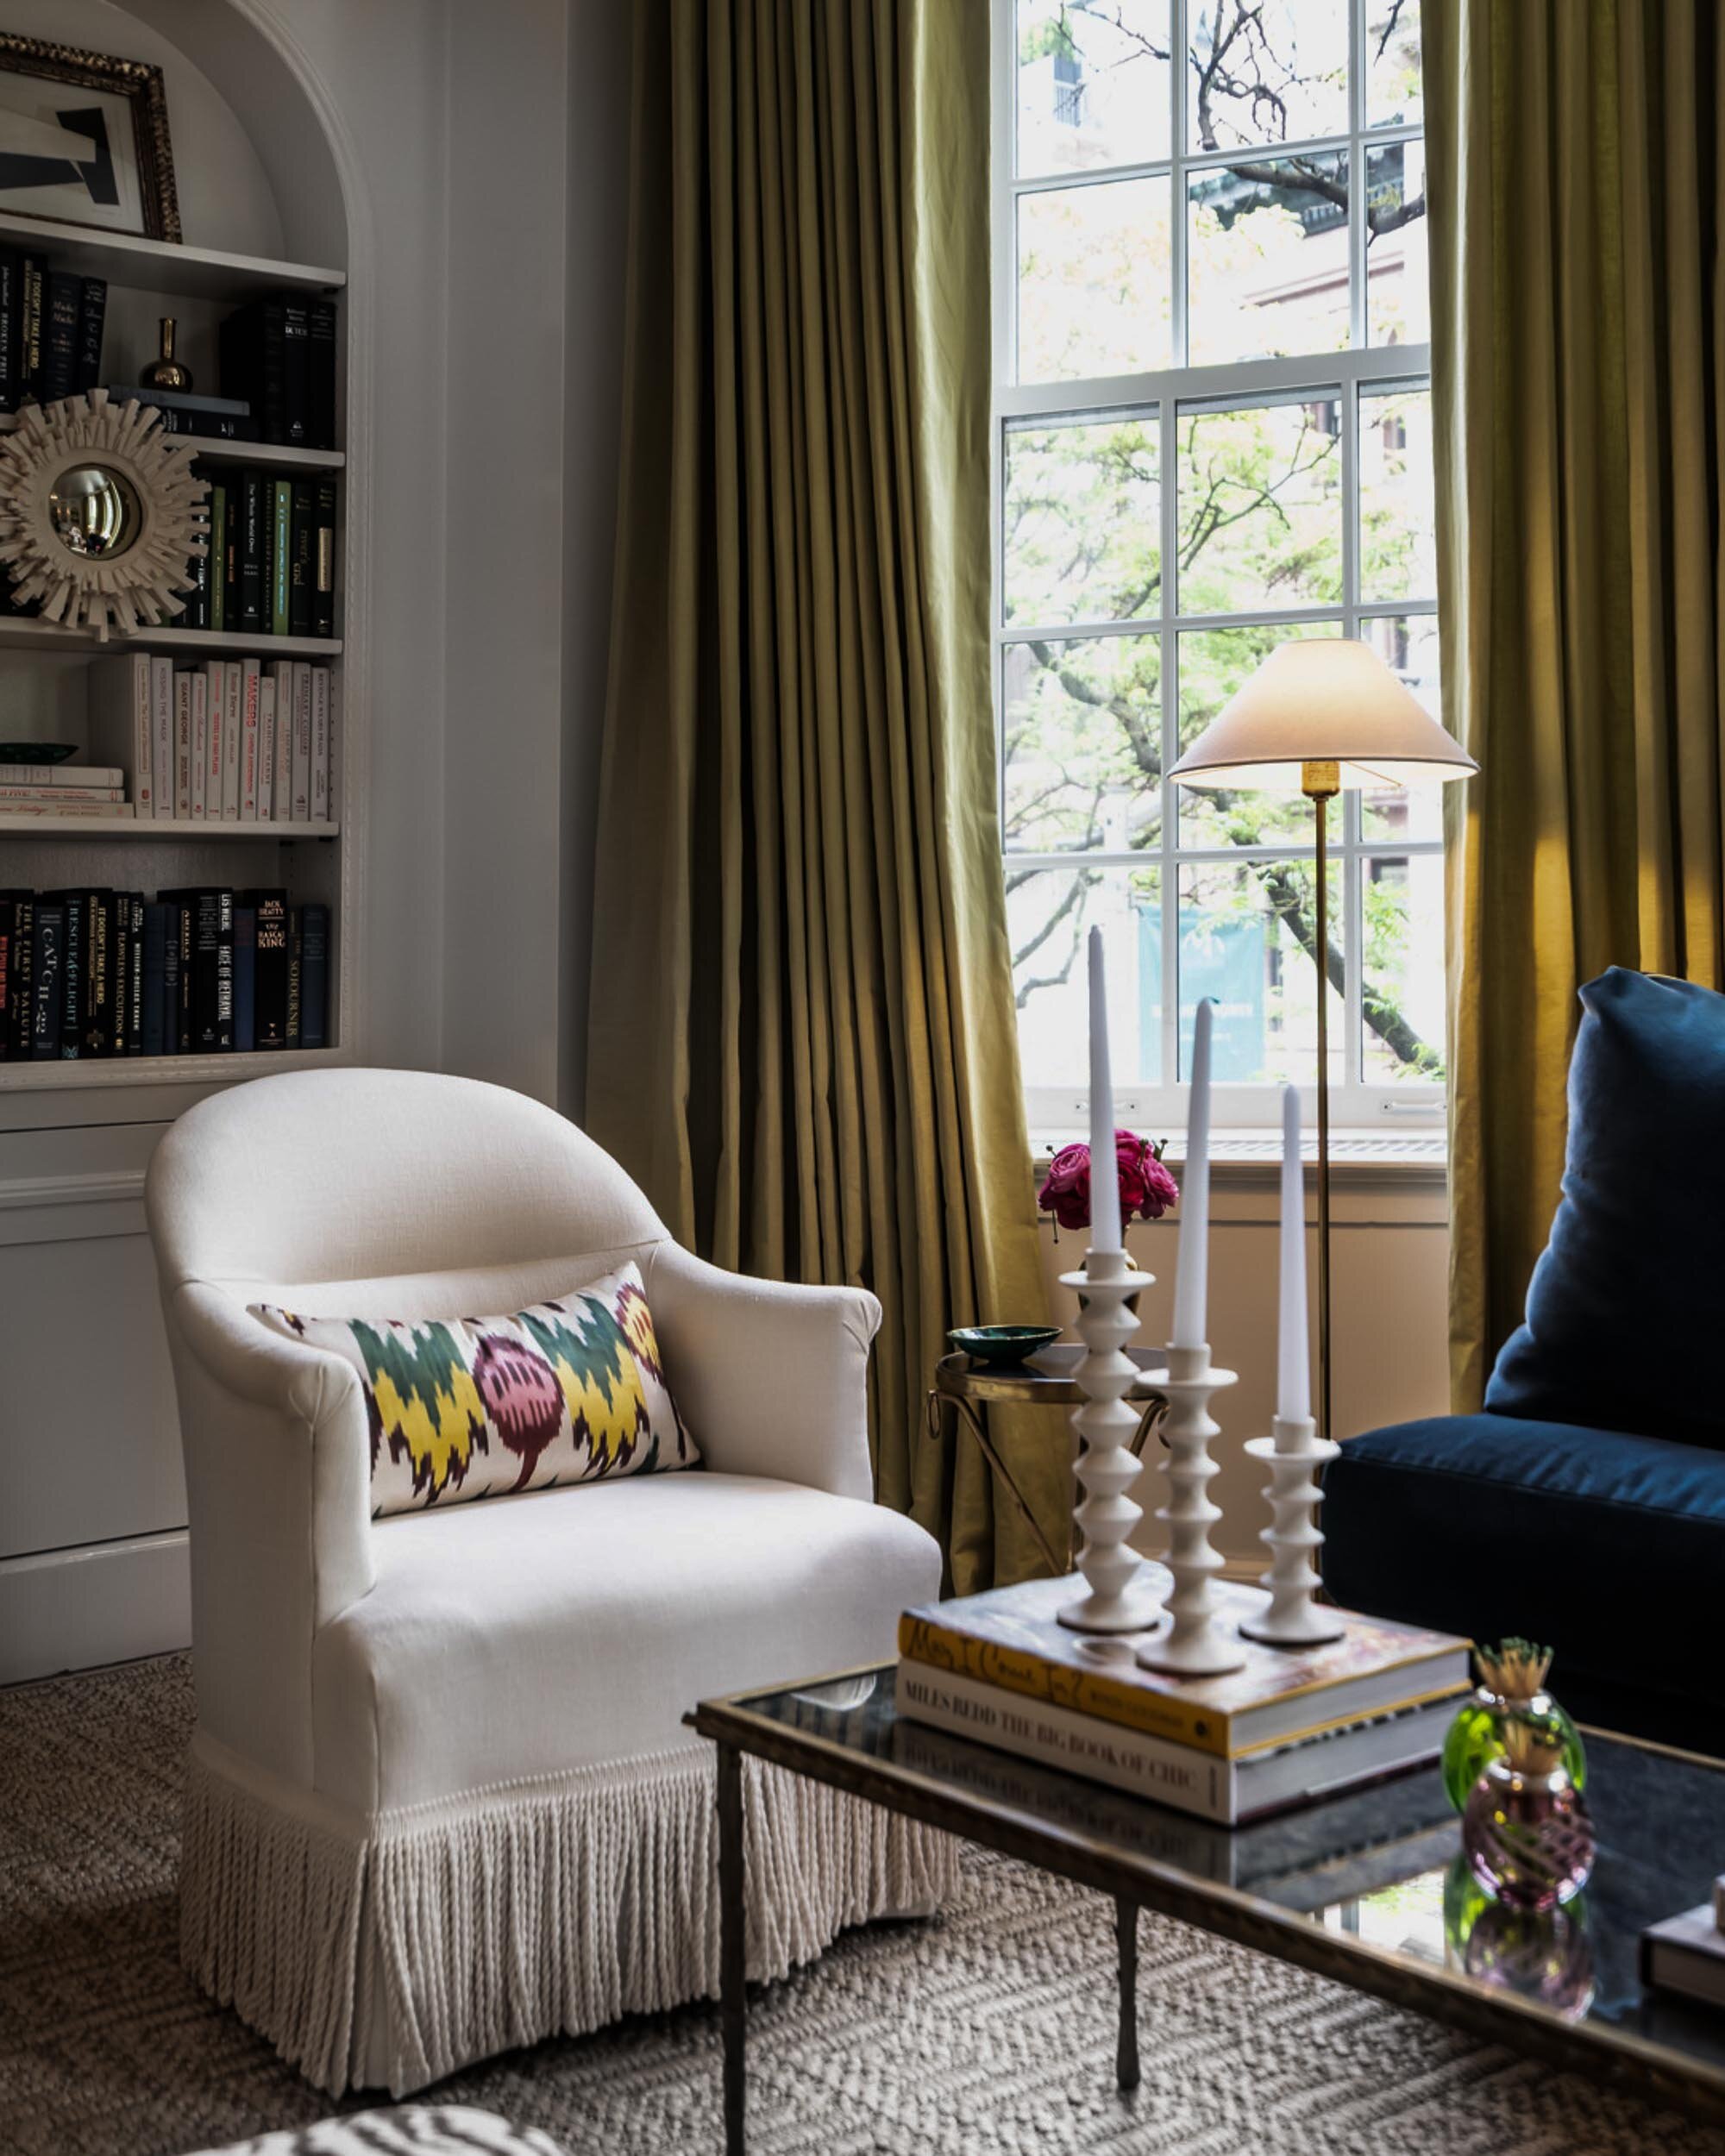  #bradsteinphoto, Highlights from the #kipsbayshowhouse19 @PalomaContreras beautiful room framed with Pinch Pleat Drapery in luxurious custom silk from @theshadestore @KBShowhouse.  #LoveYourWindows #KipsBayShowhouse19 photo by @bradsteinphoto 